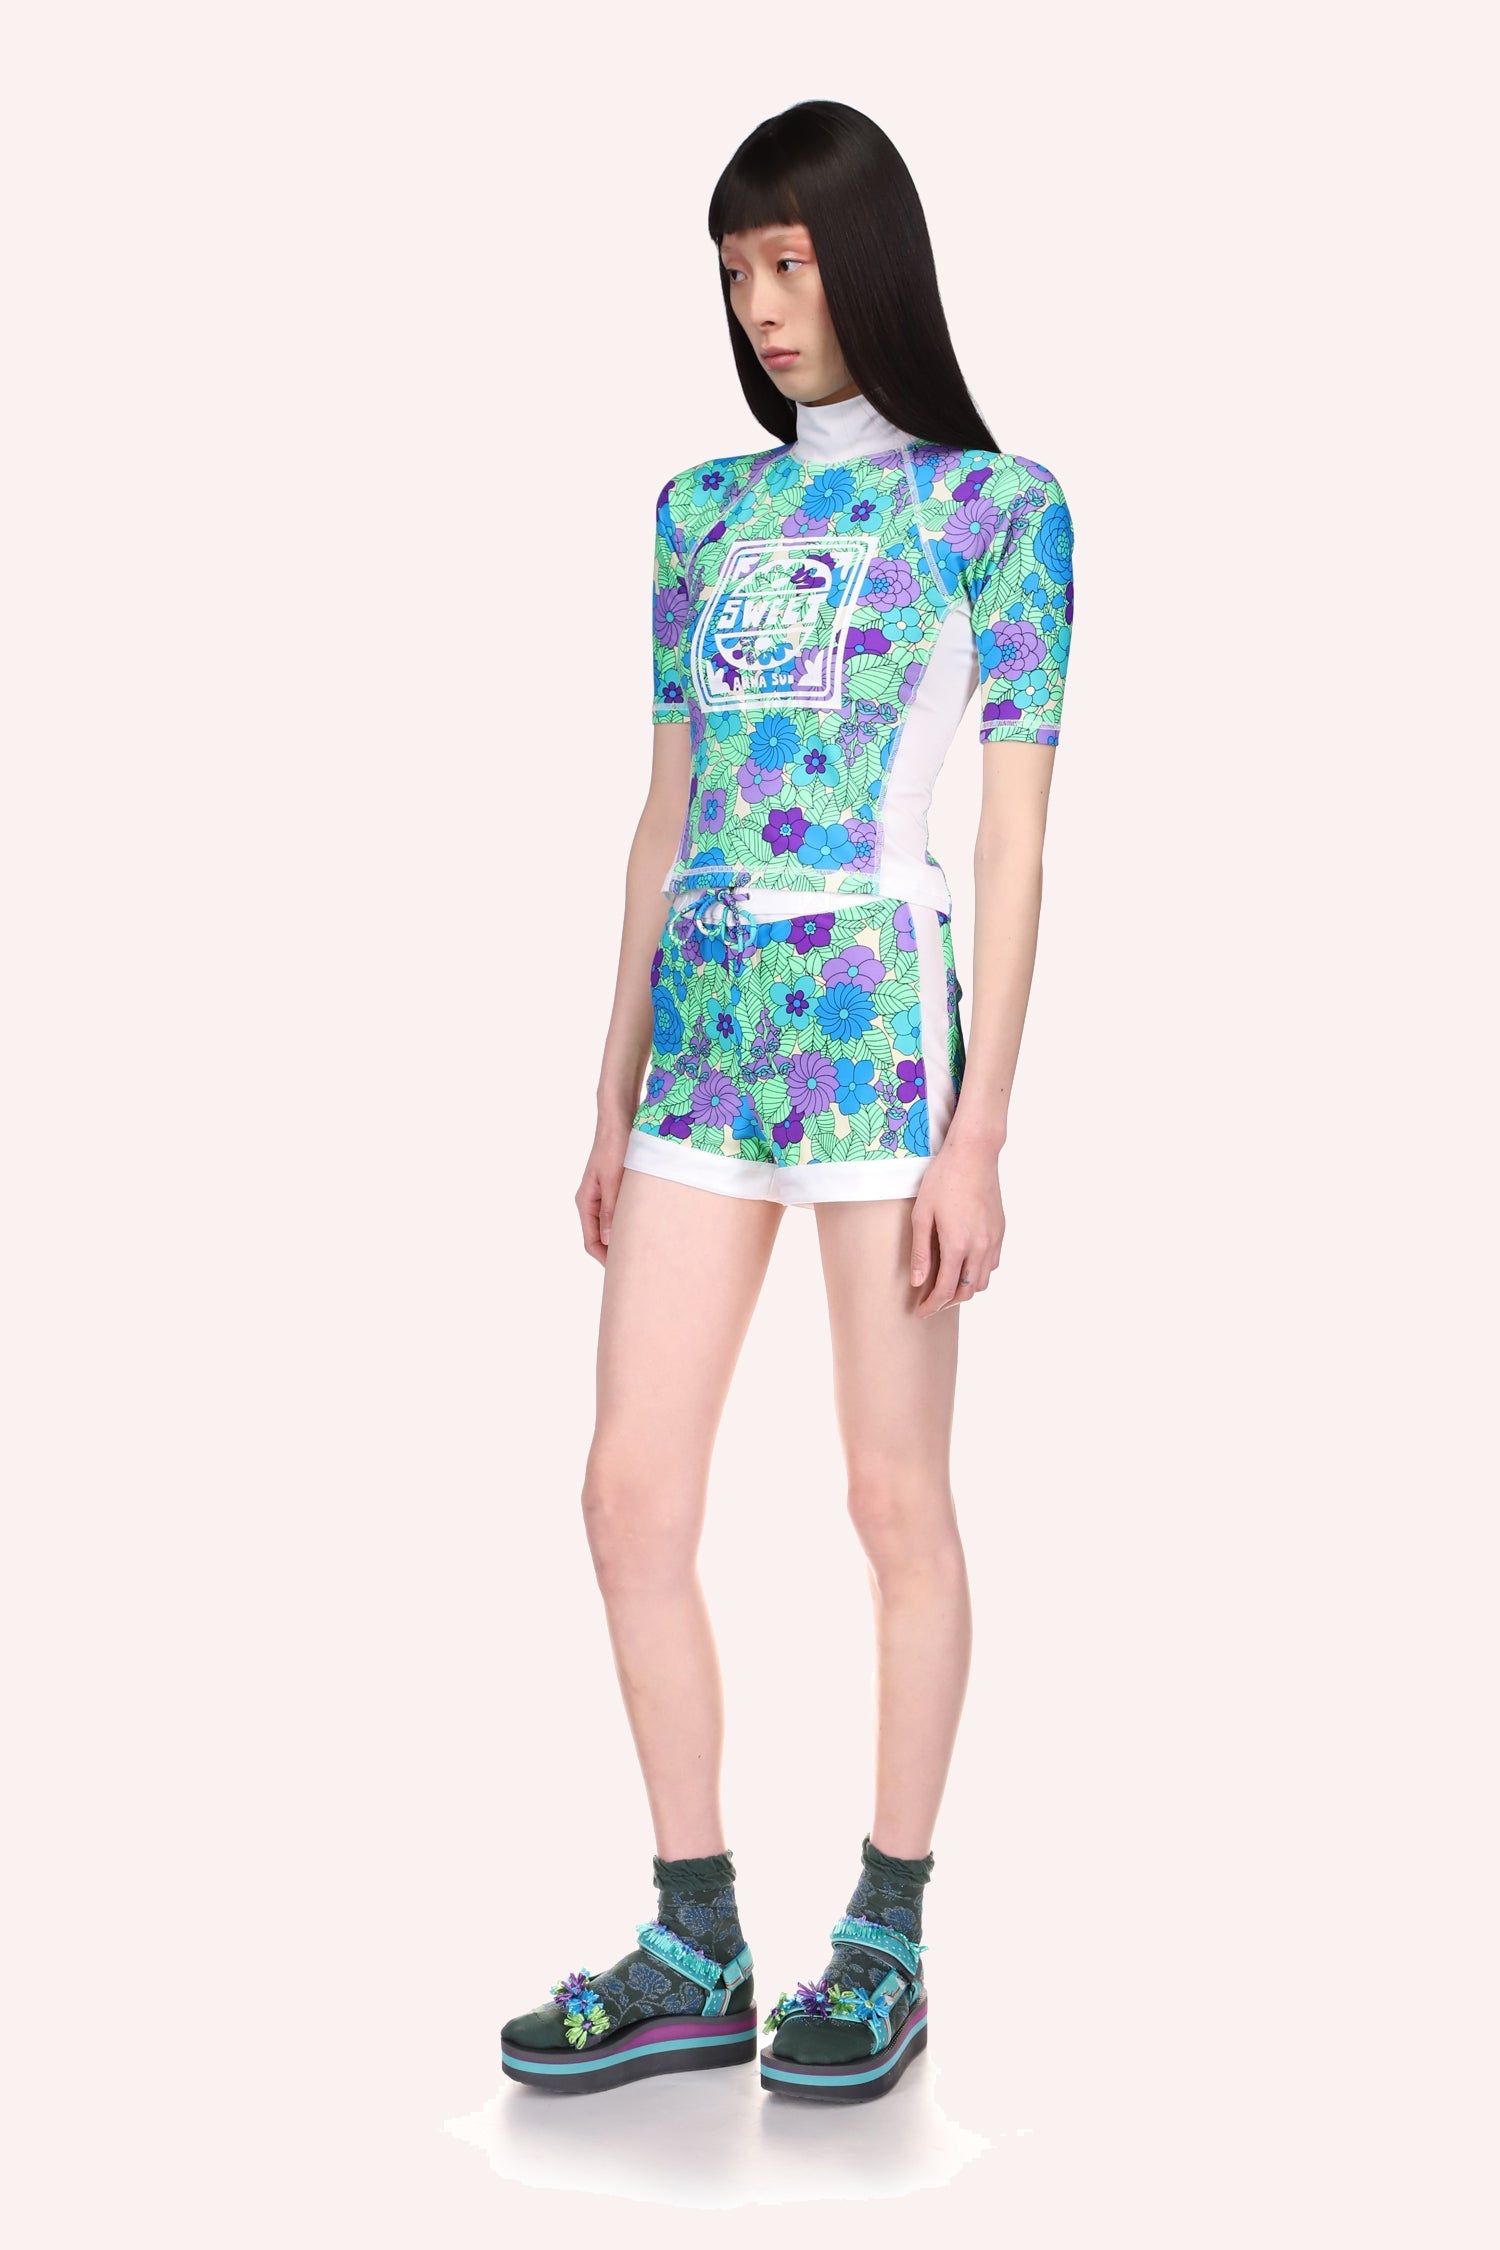 Beckoning Blossoms Surf Shorts, floral design in blue, purple light and dark on a green leaves background